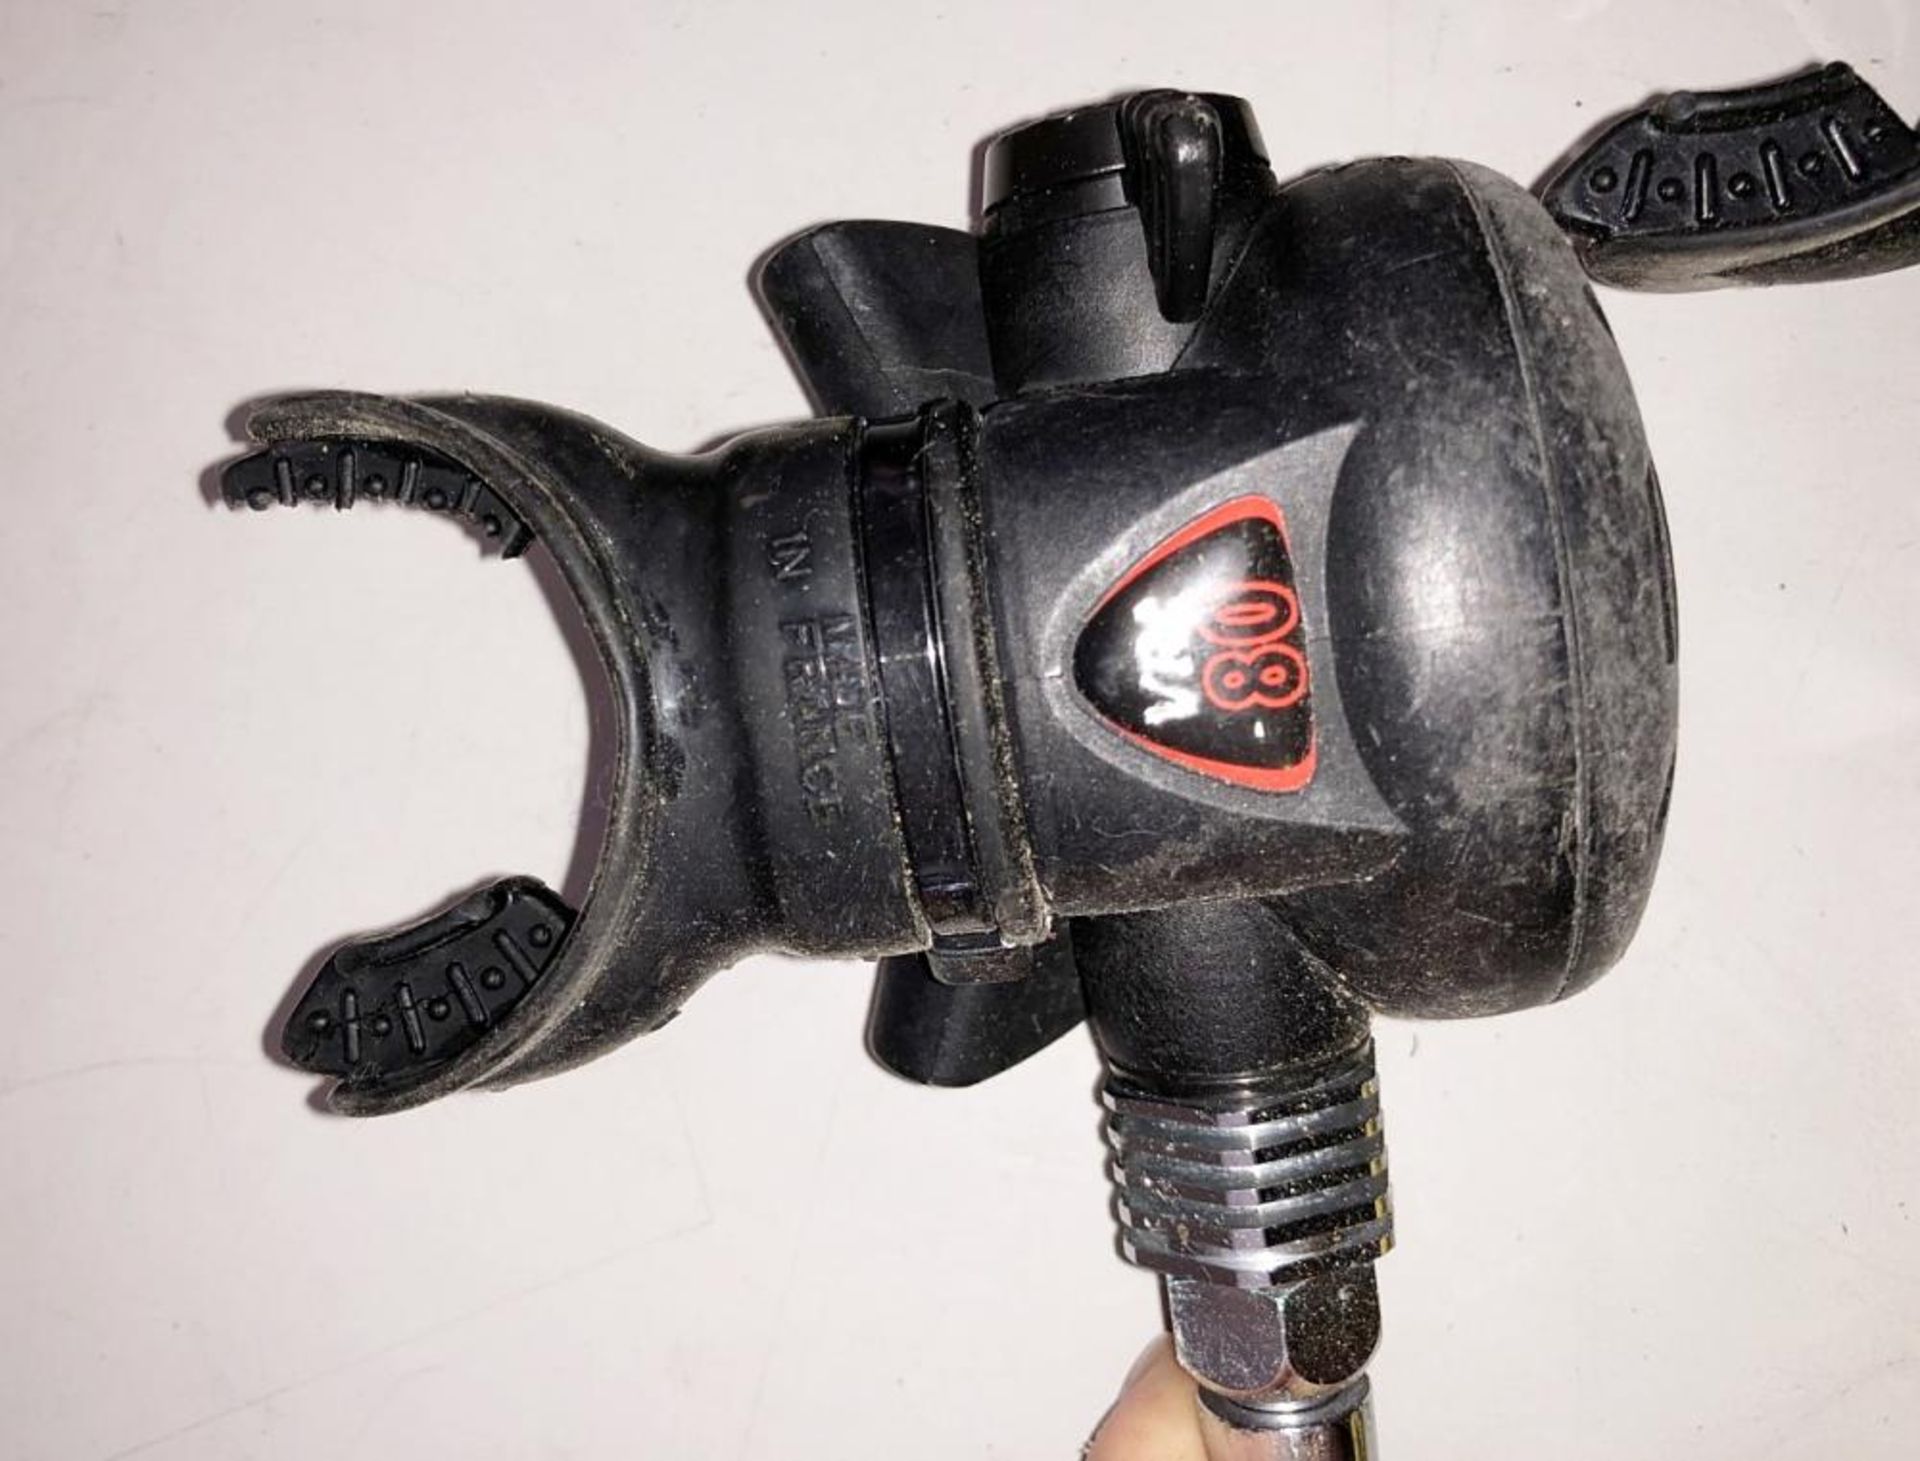 Beuchat Scuba Air Cylinder and a Full Regulator Set - Ref: NS114, NS321 - CL349 - Altrincham WA14 - Image 10 of 12